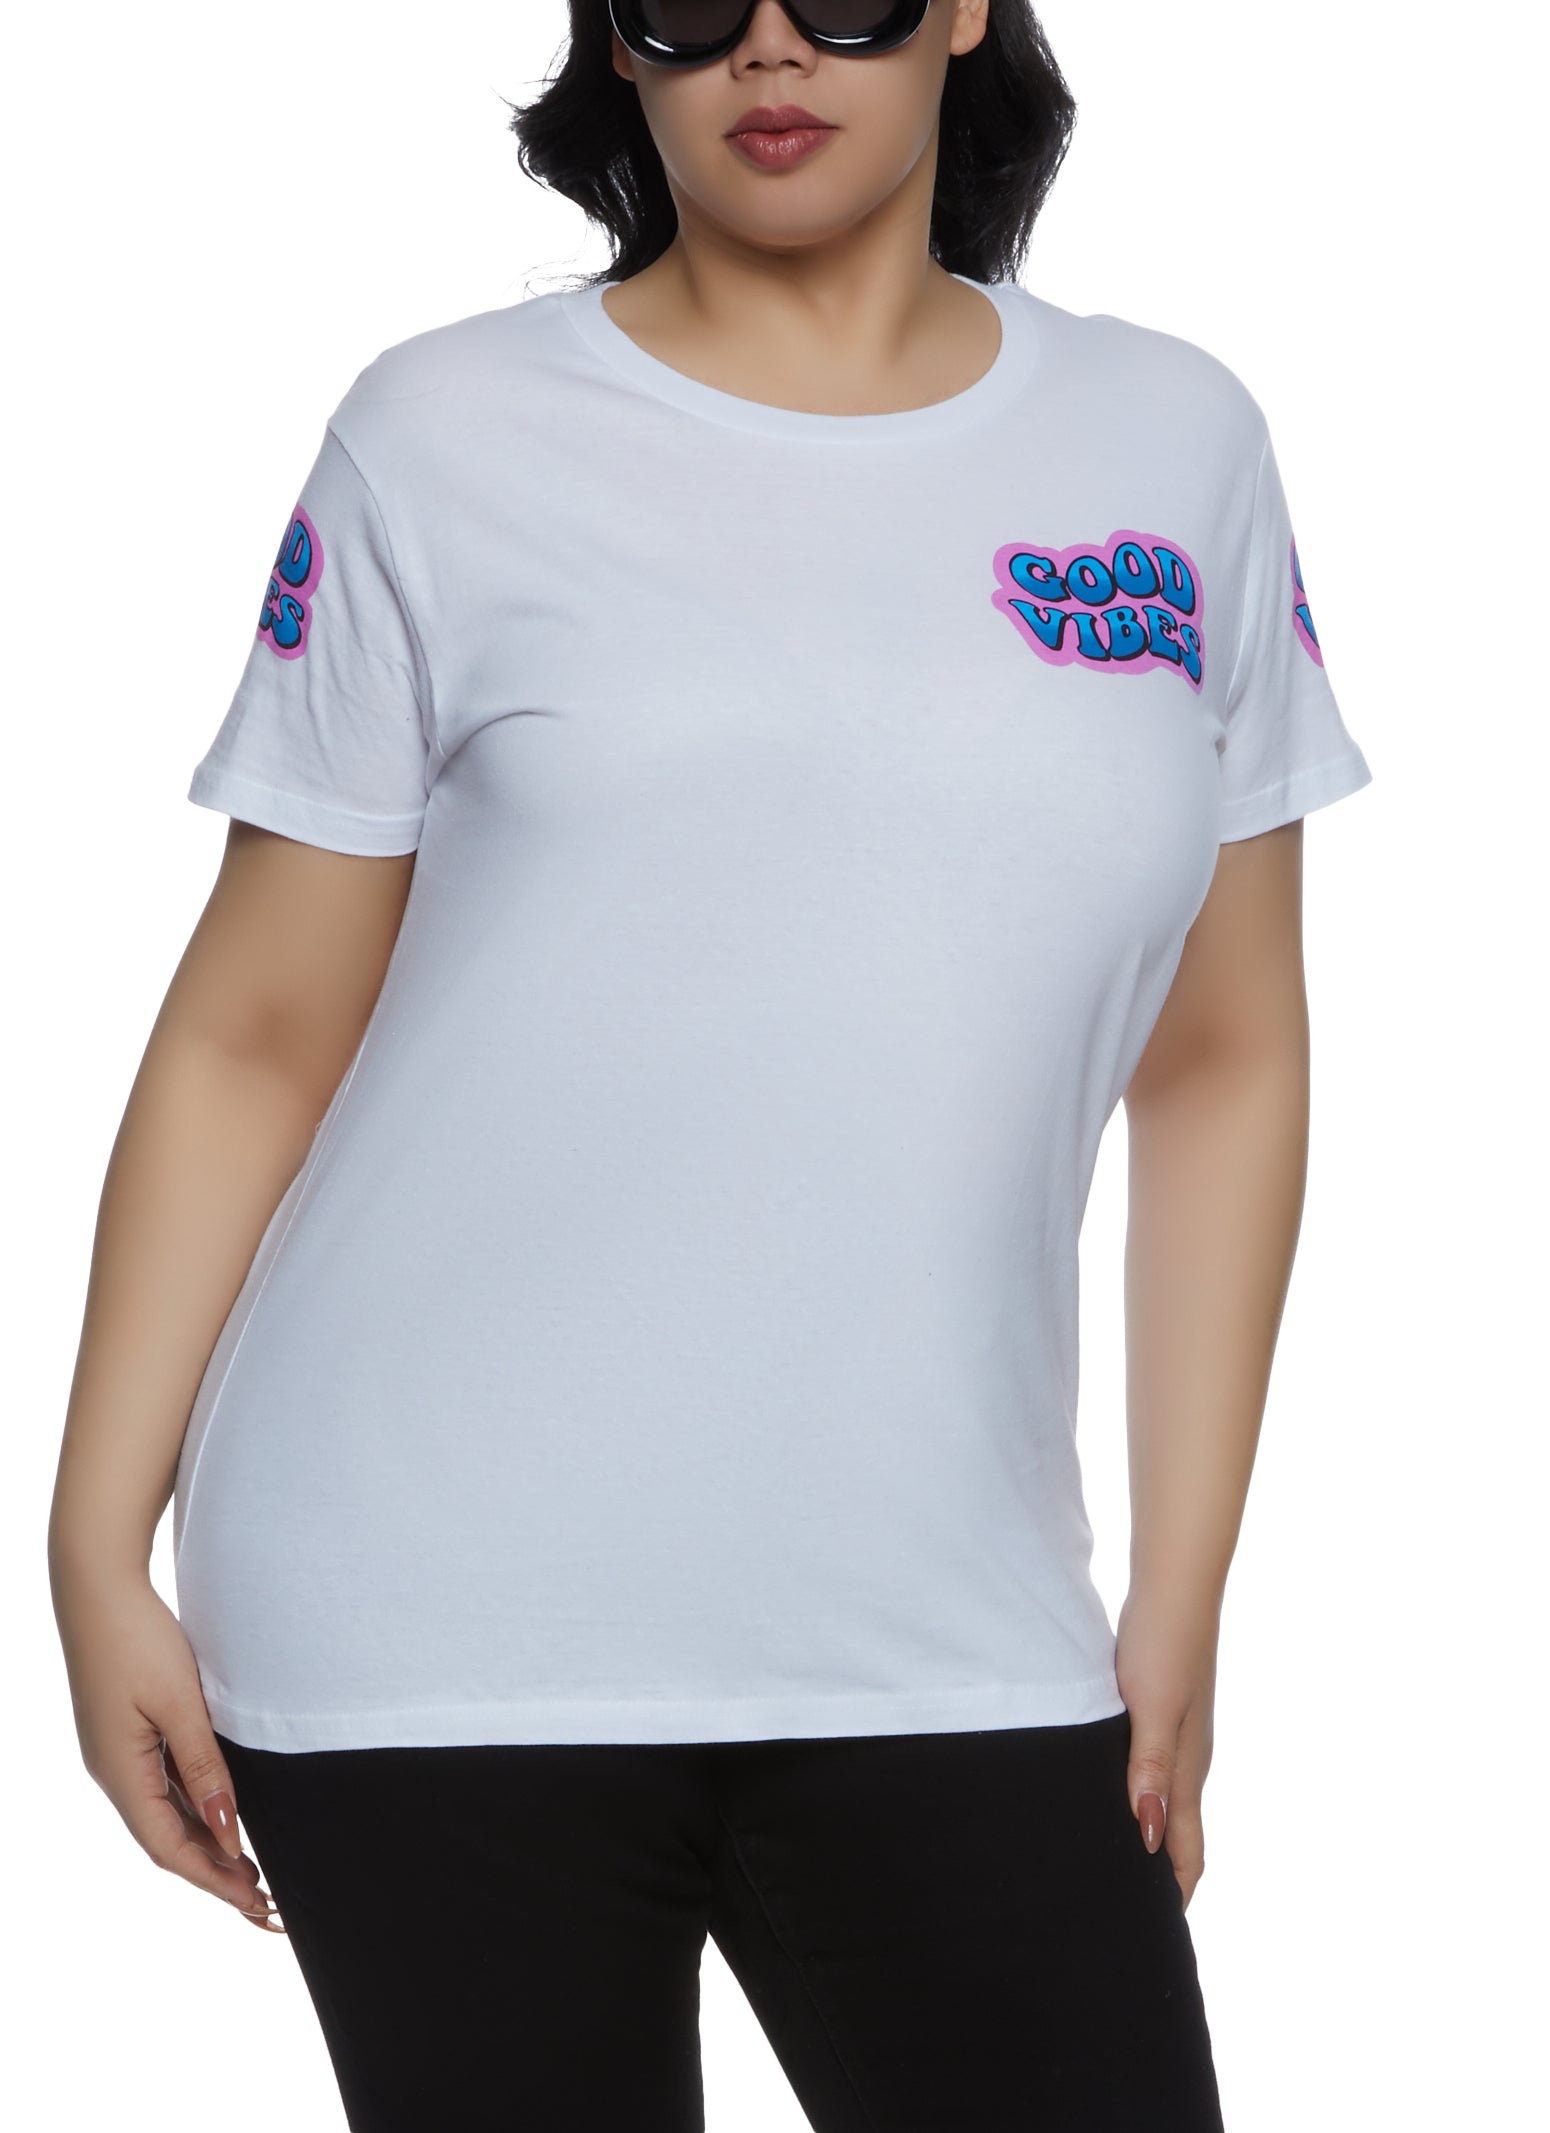 Womens Plus Size Good Vibes Graphic Tee, White, Size 1X